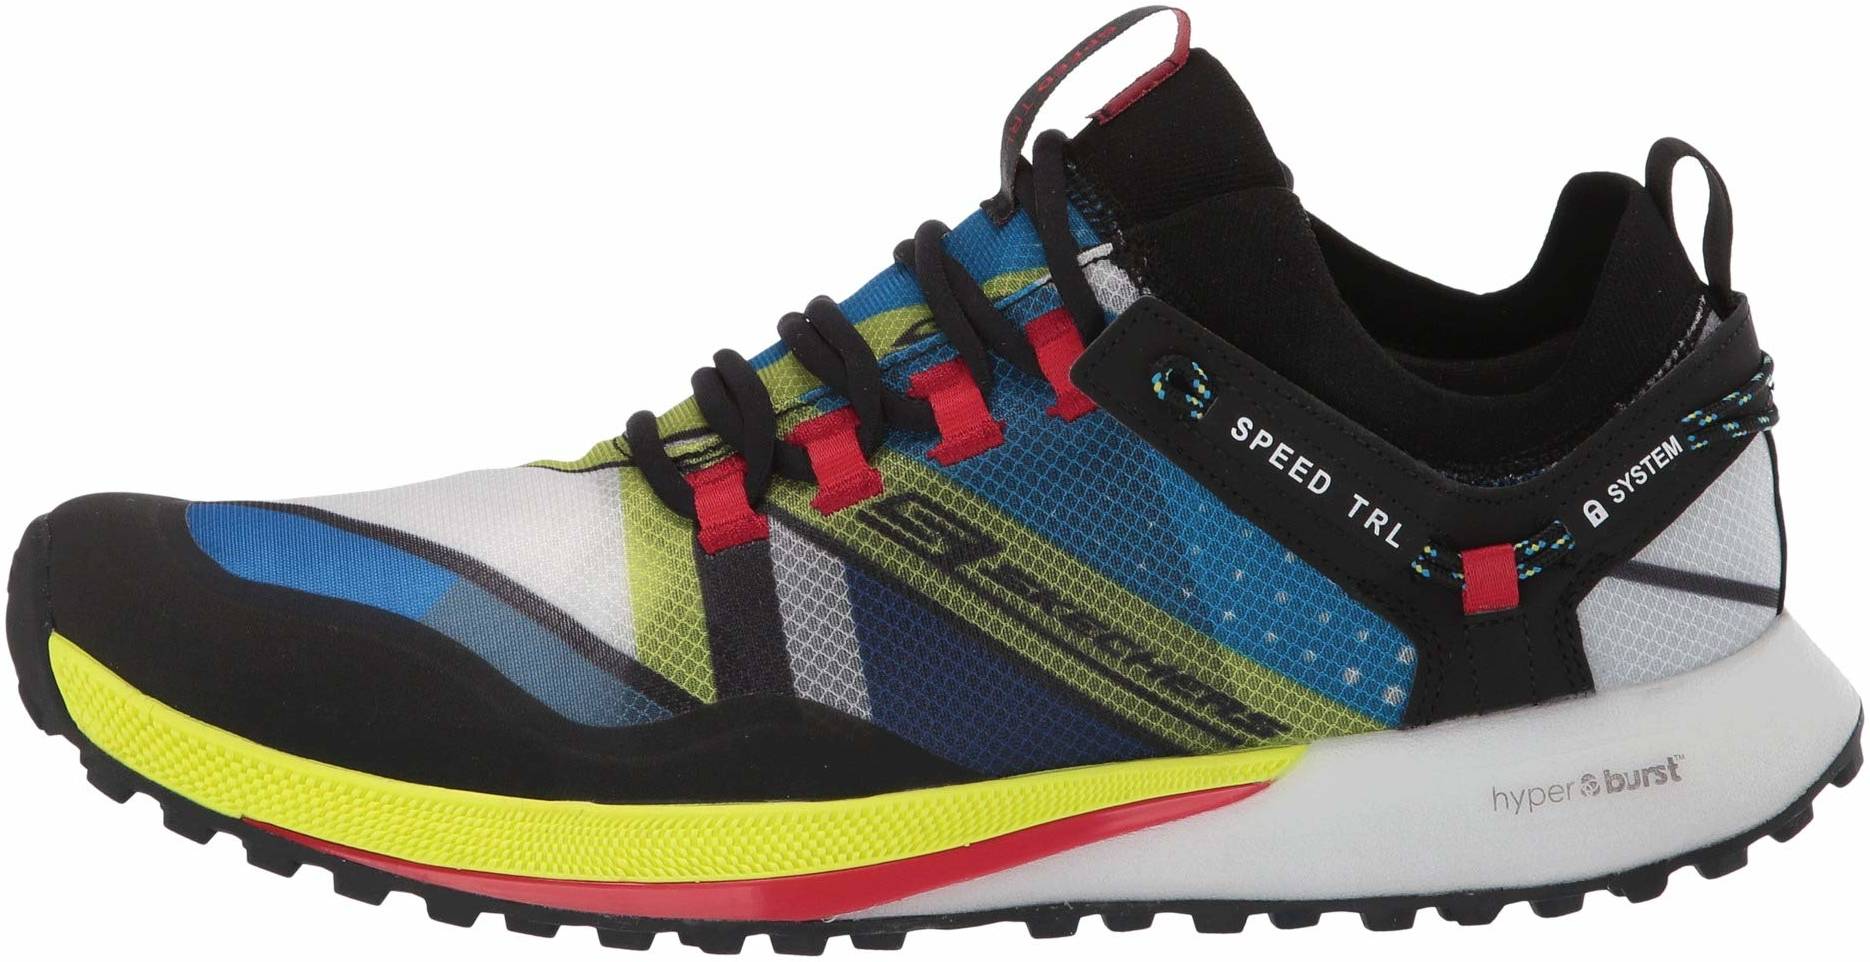 skechers trail running shoes review